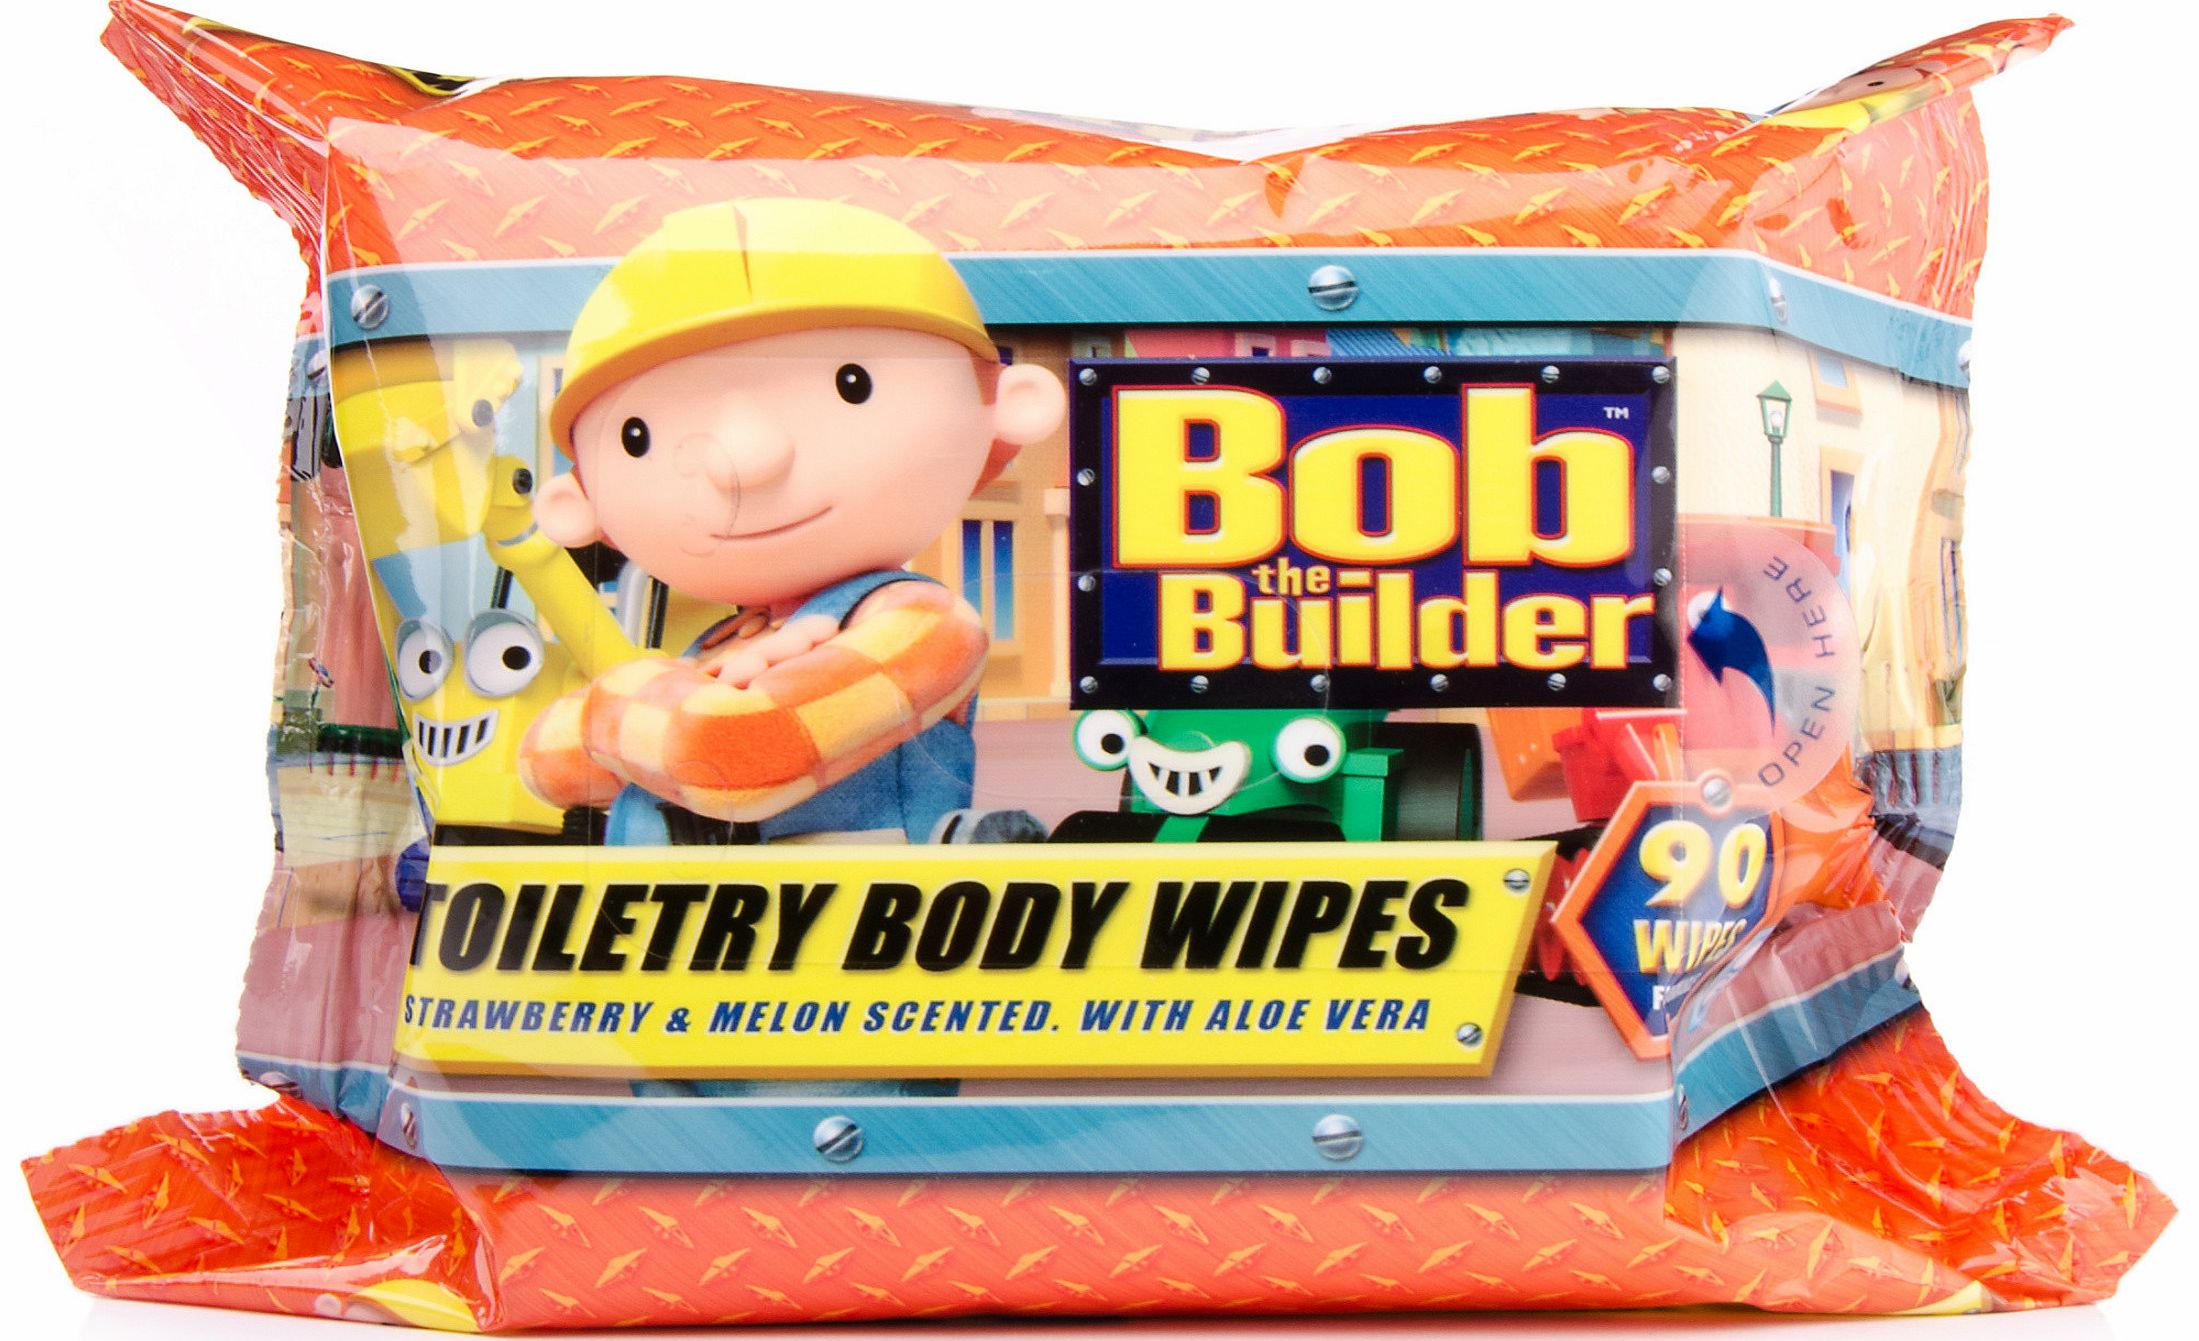 Bob the Builder Toiletry Wipes